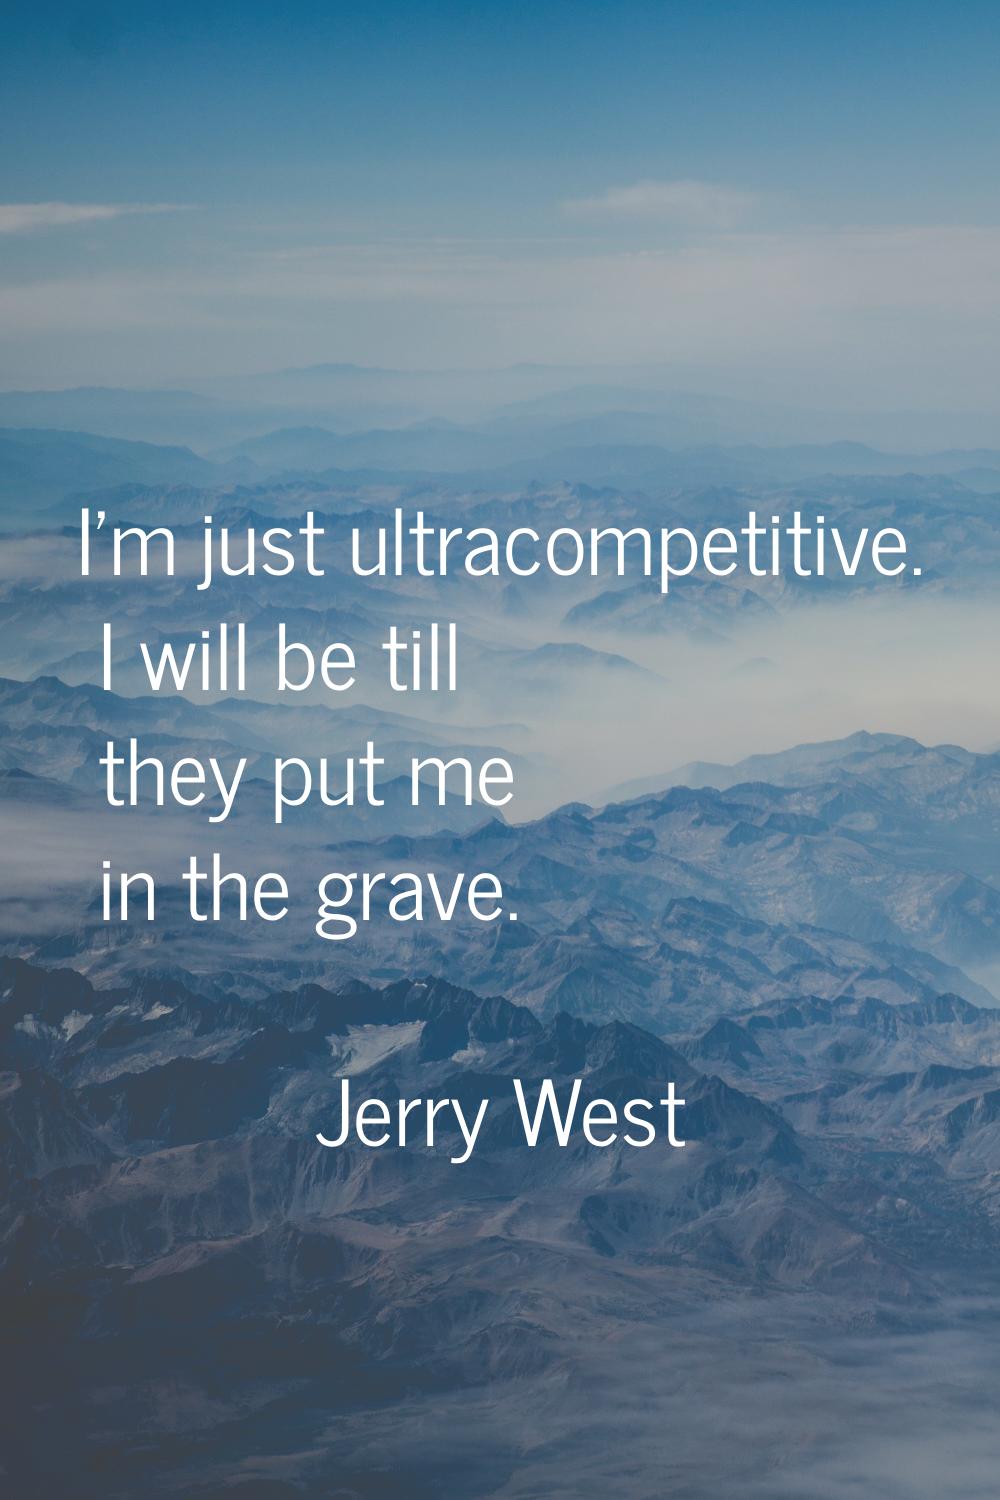 I'm just ultracompetitive. I will be till they put me in the grave.